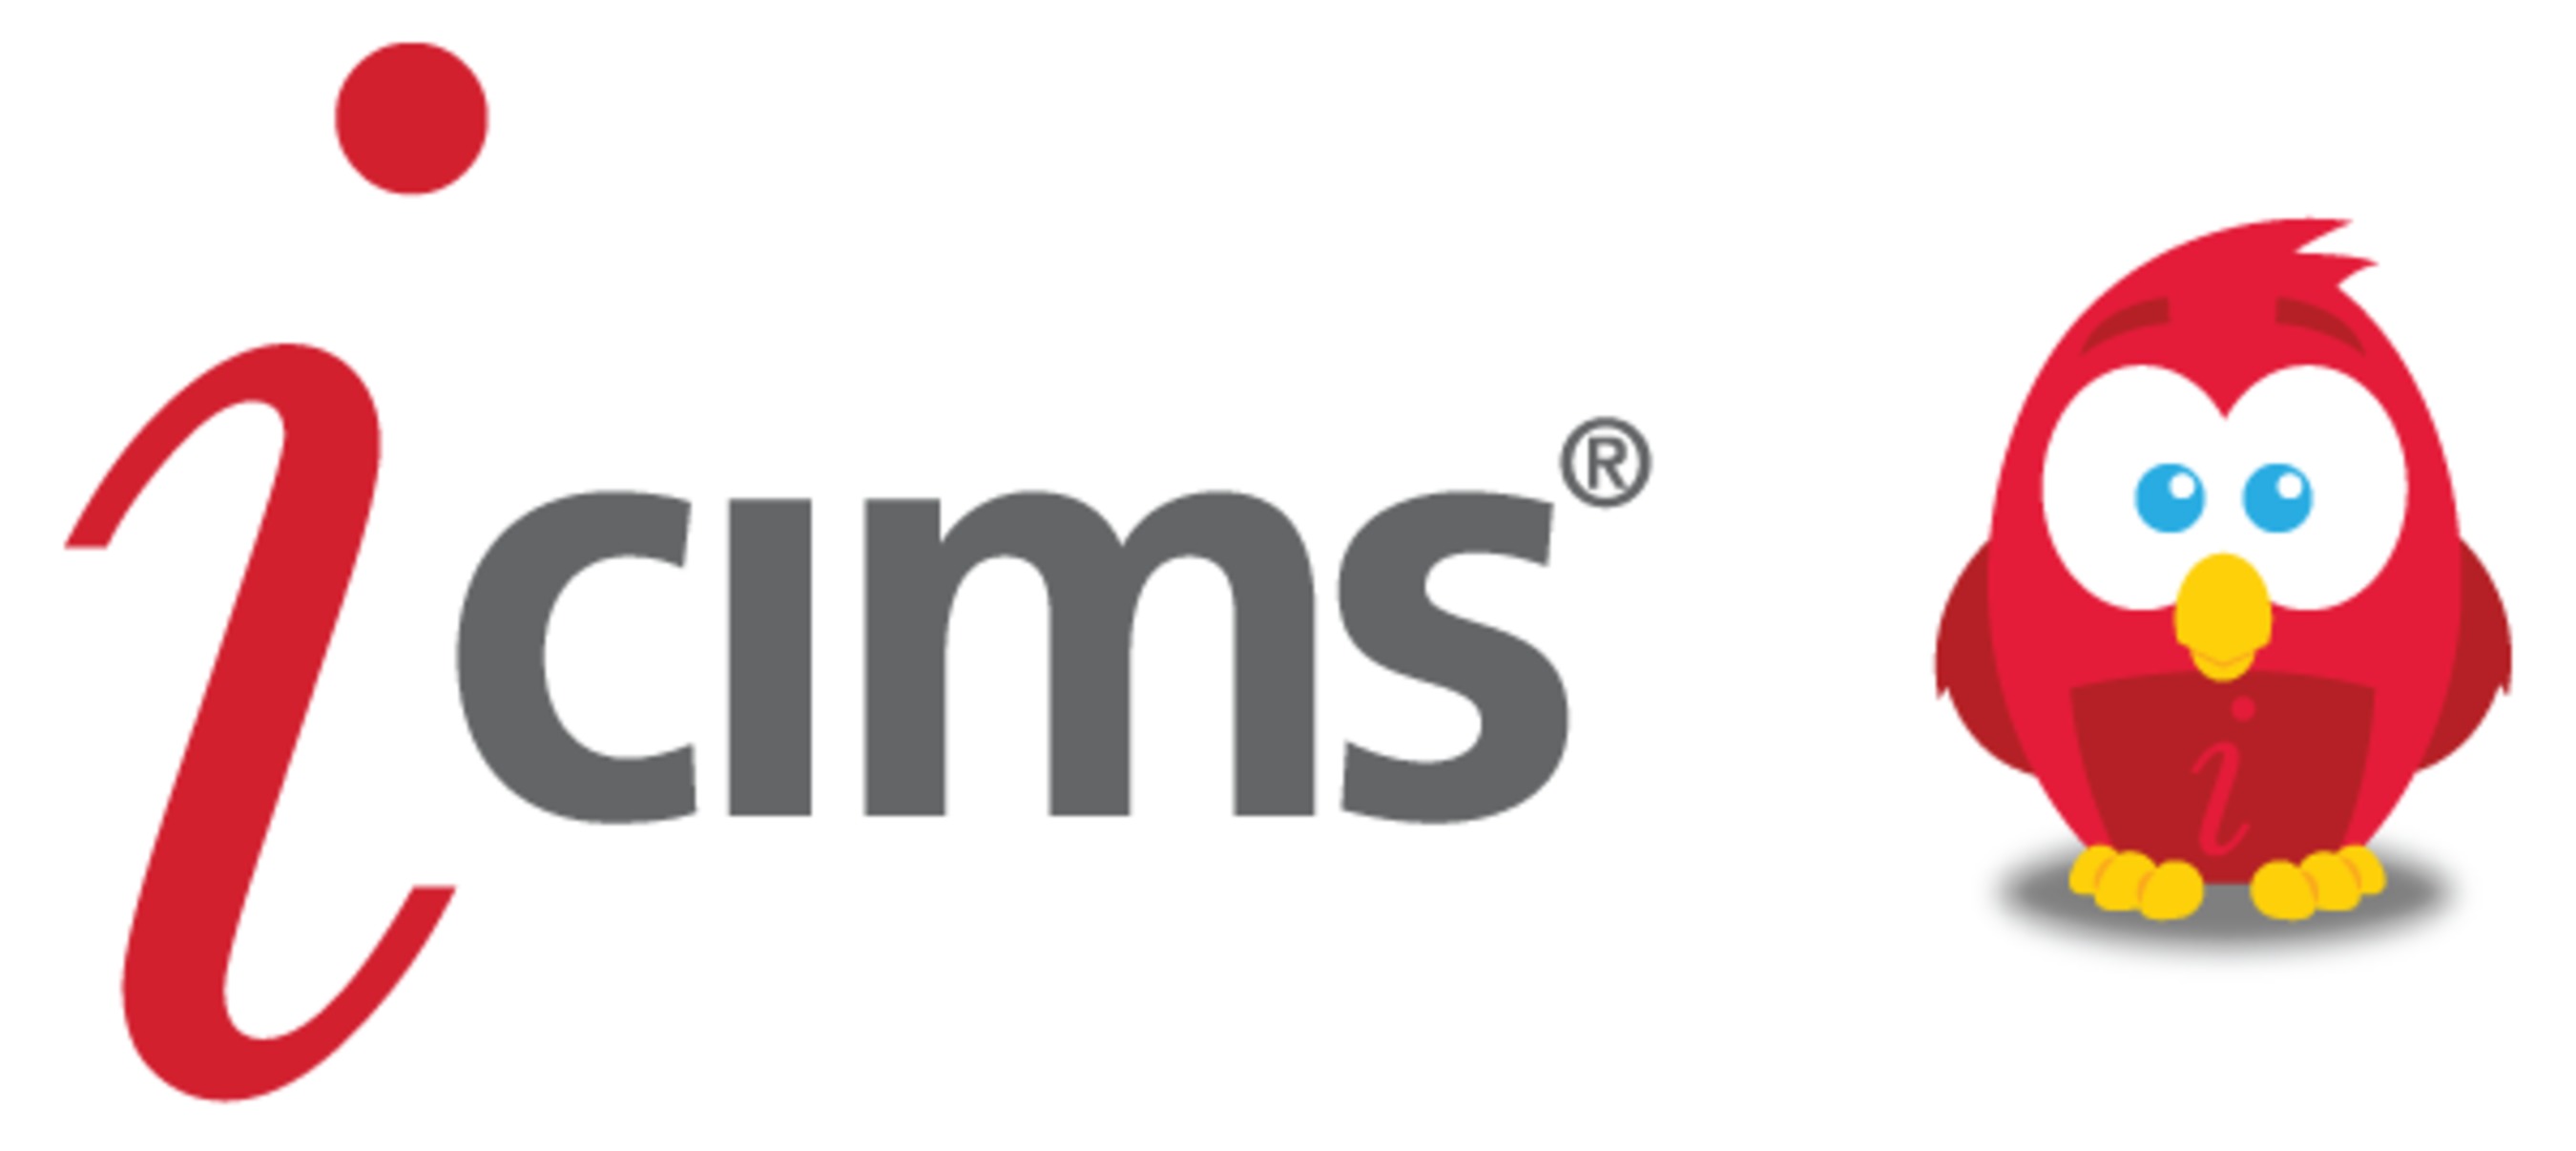 iCIMS, Inc., a leading provider of Software-as-a-Service (SaaS) talent acquisition software solutions for growing businesses